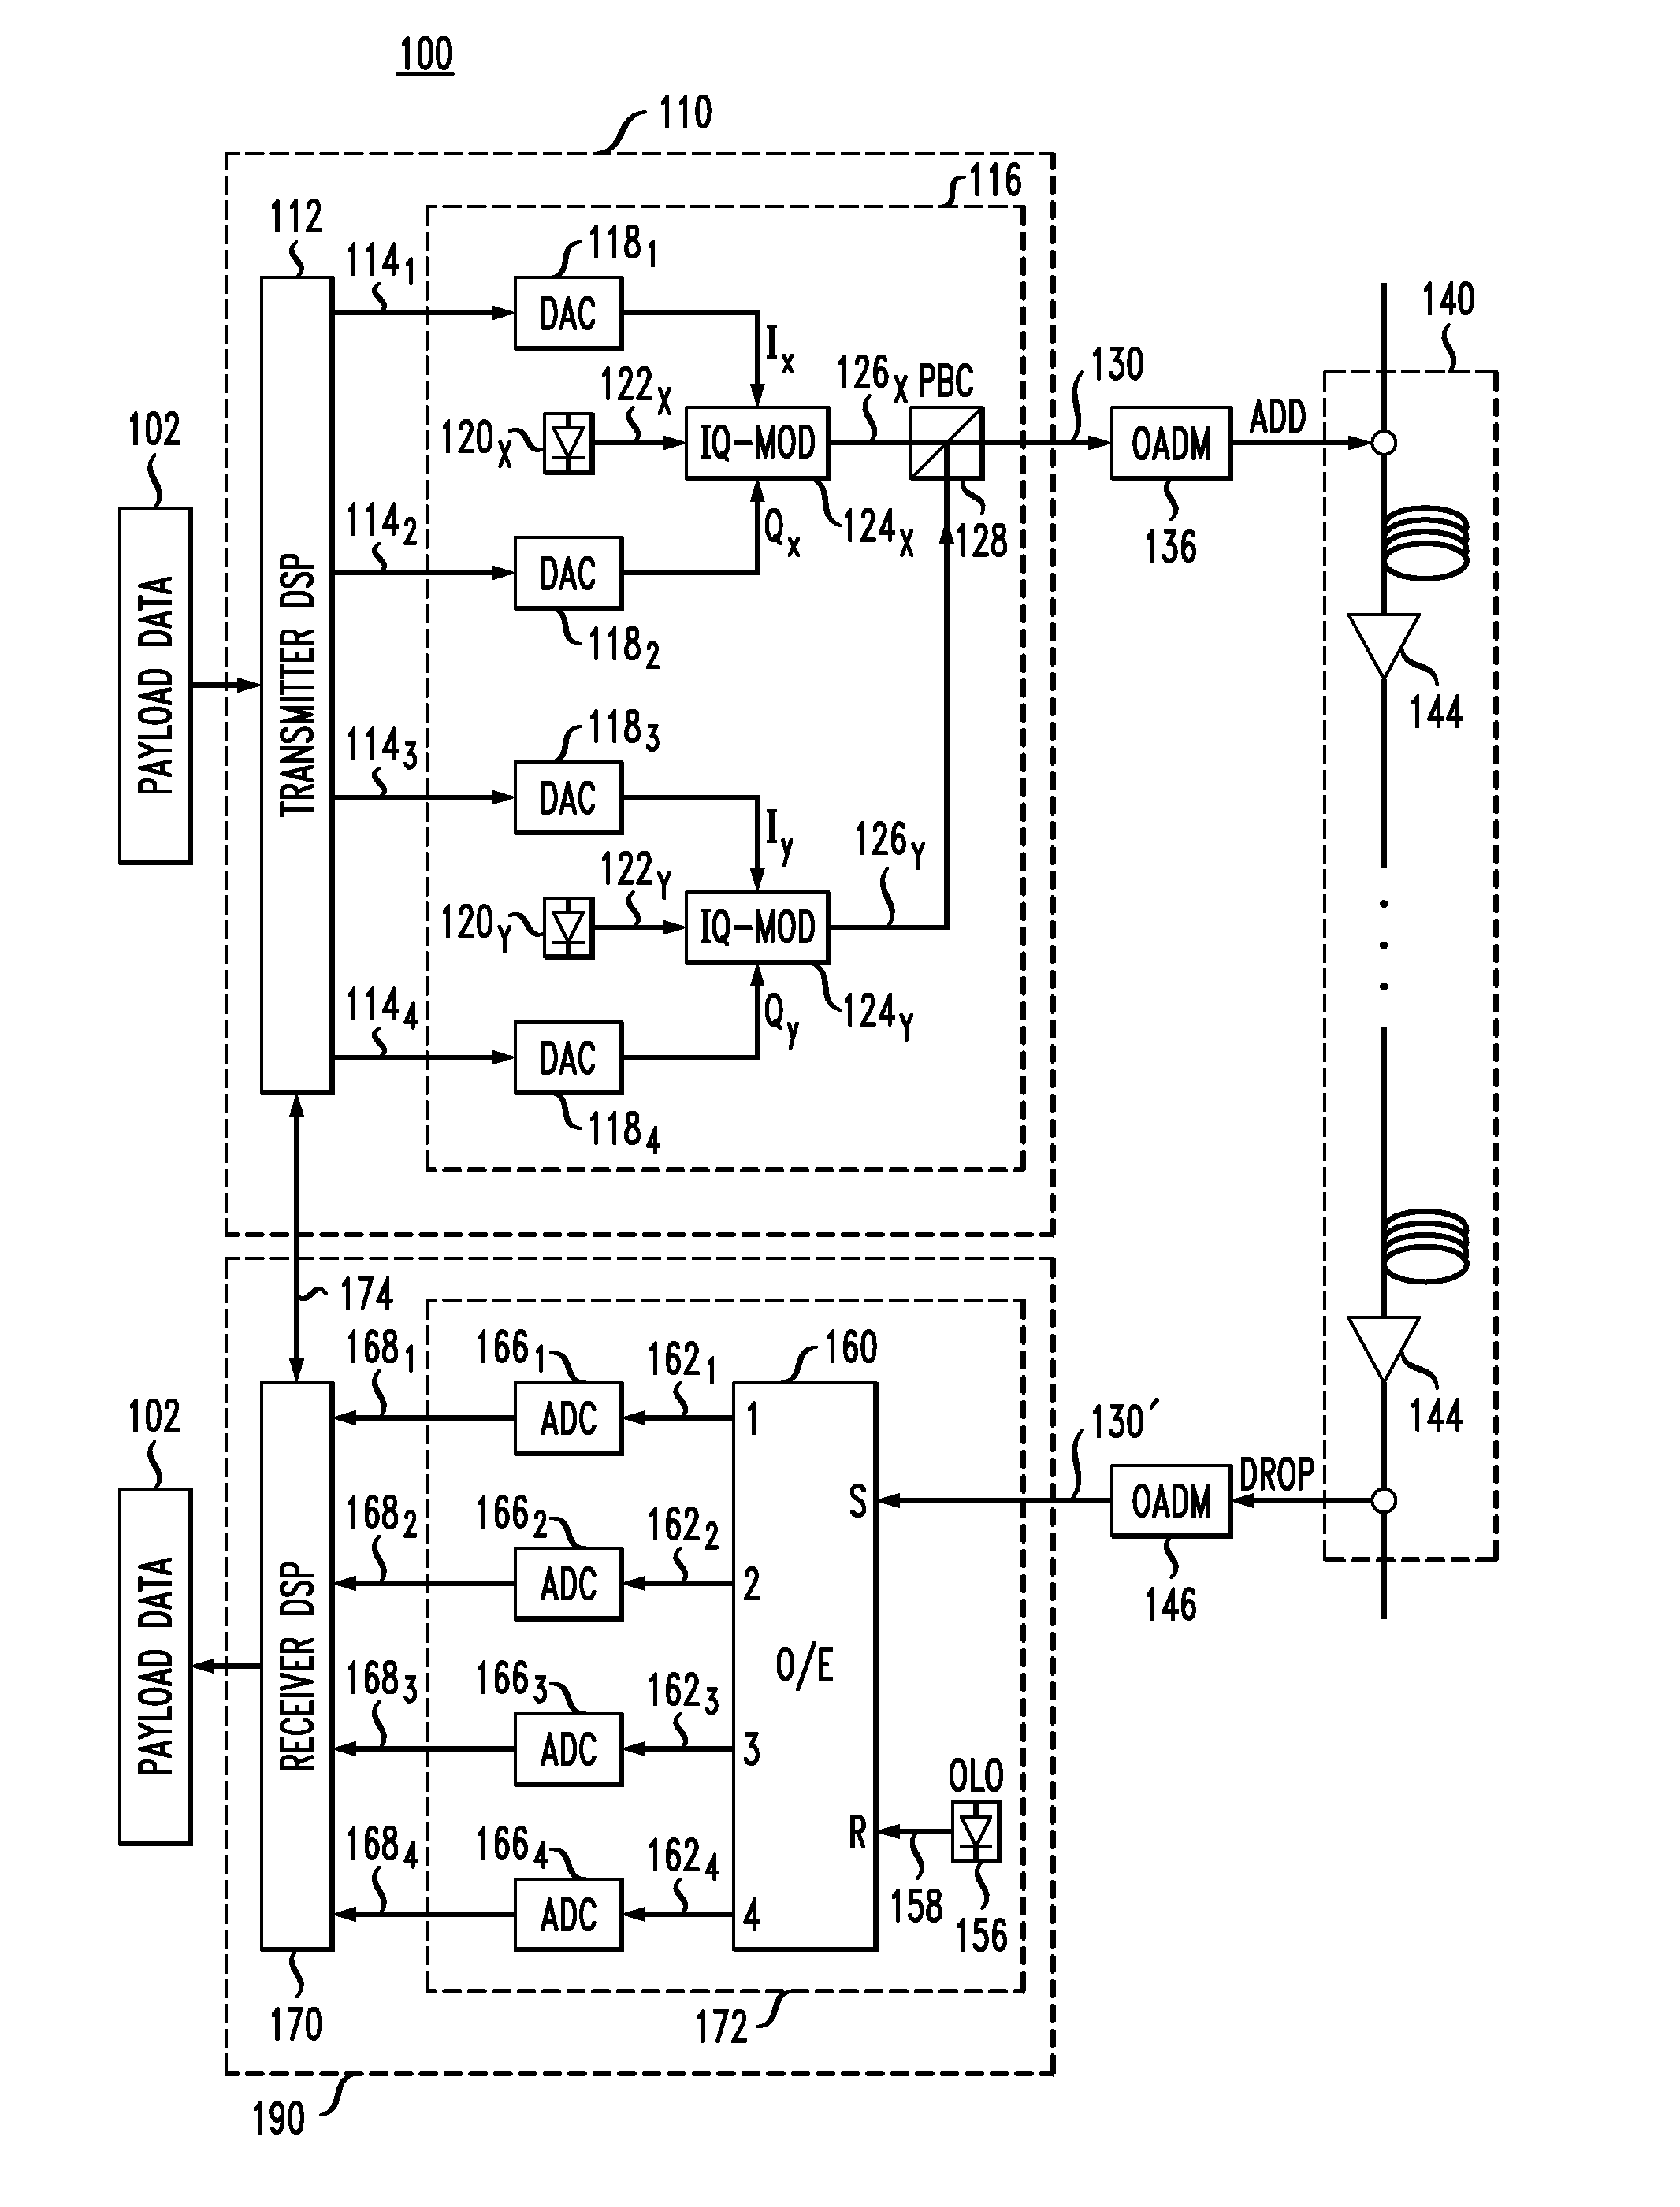 Optical receiver having a chromatic-dispersion compensation module with a multibranch filter-bank structure